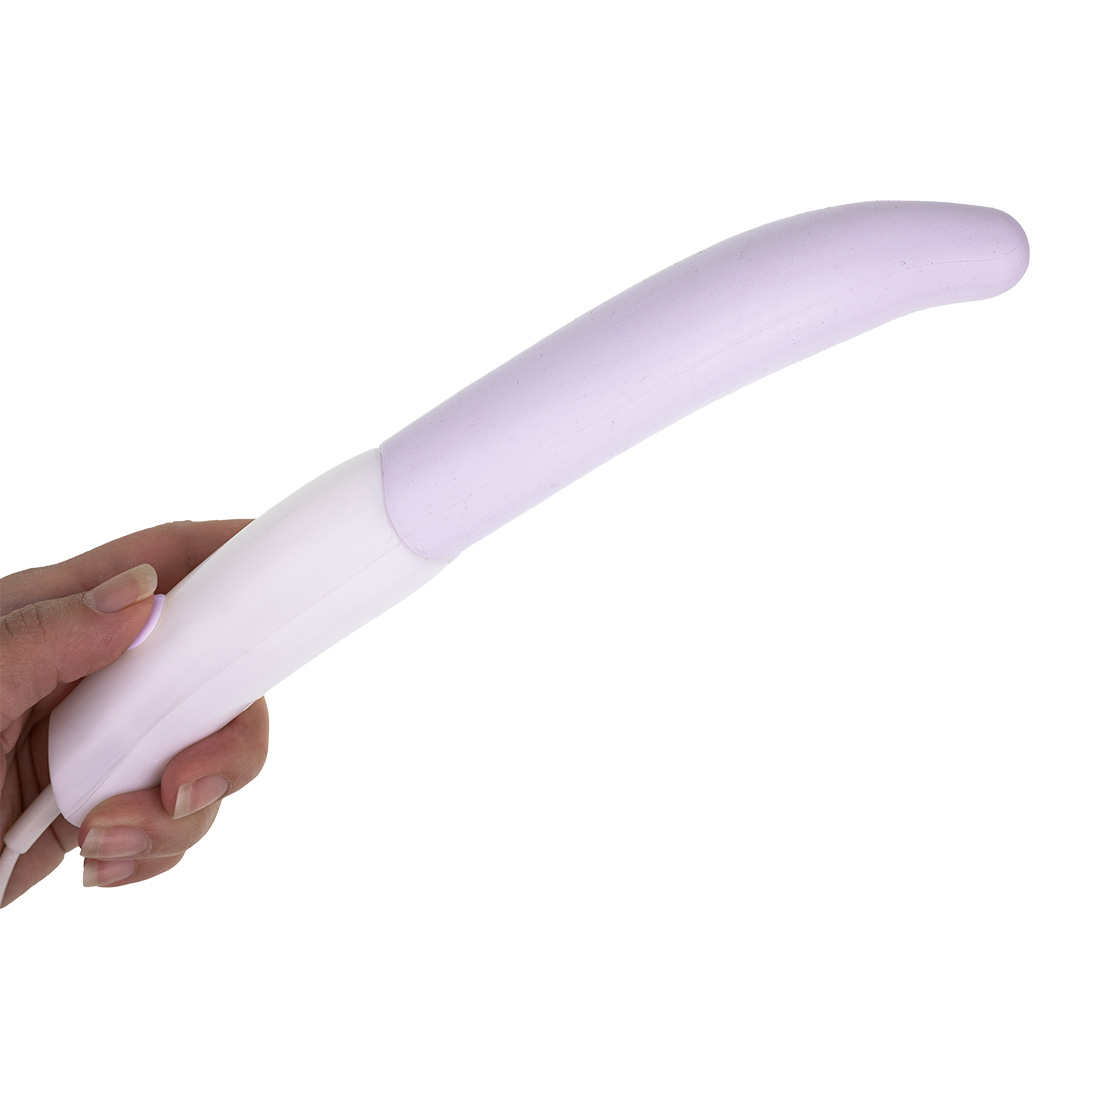 Turbo Powered Pinpoint Massager - Pinpoint